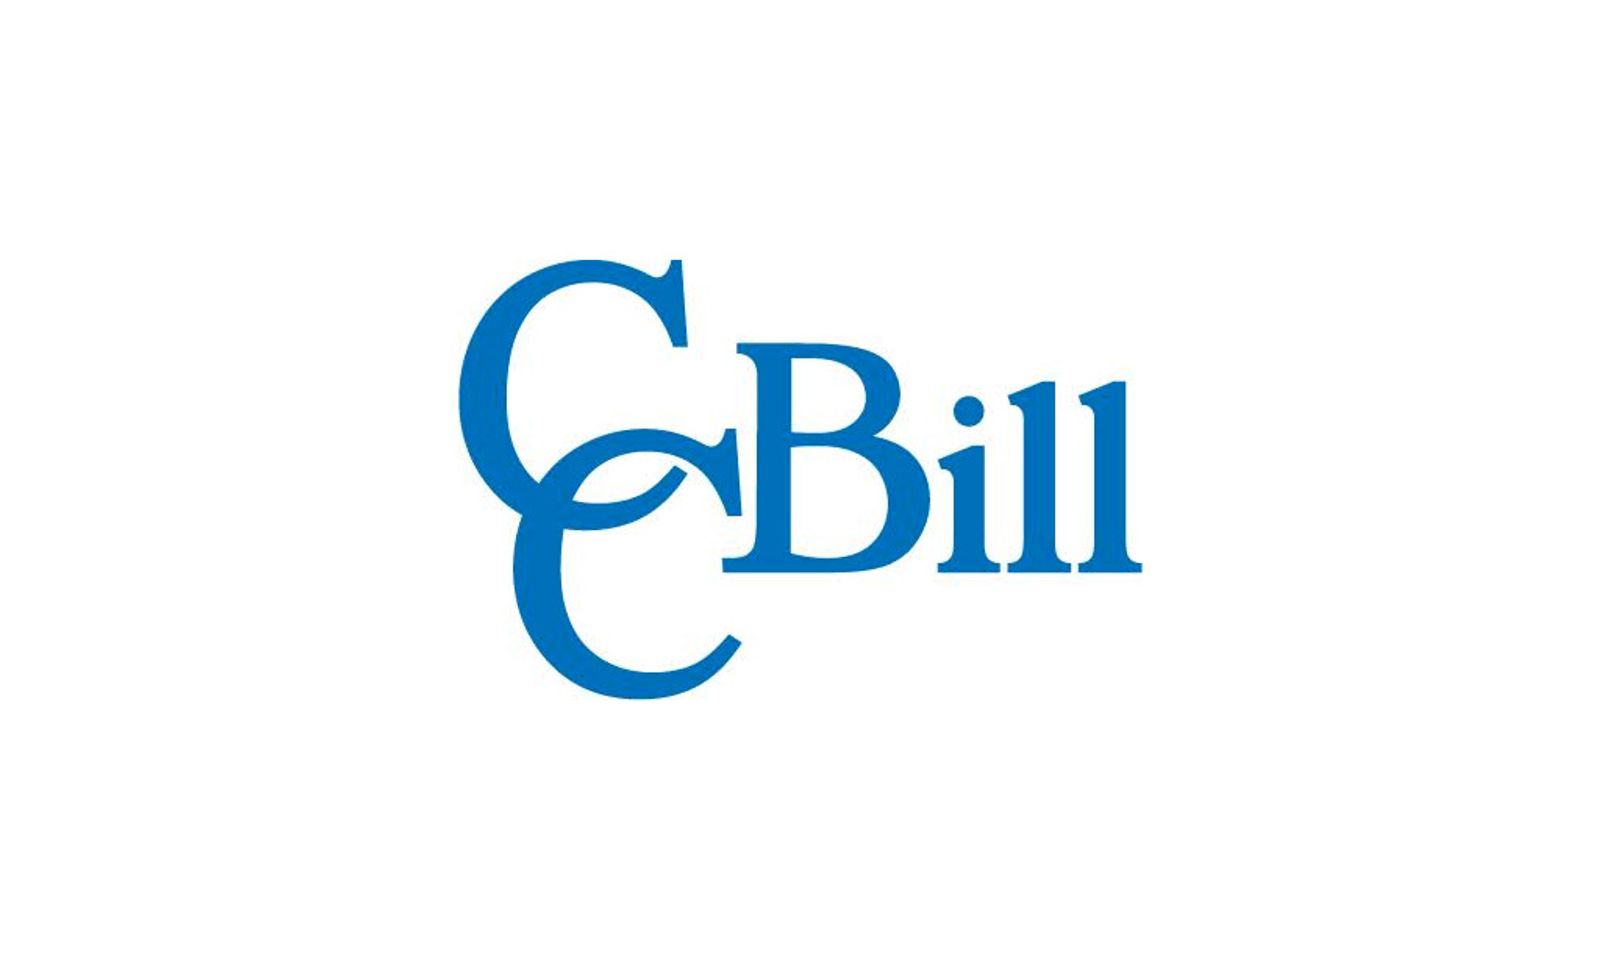 CCBill Wins Industry Award for Payment Services Leadership